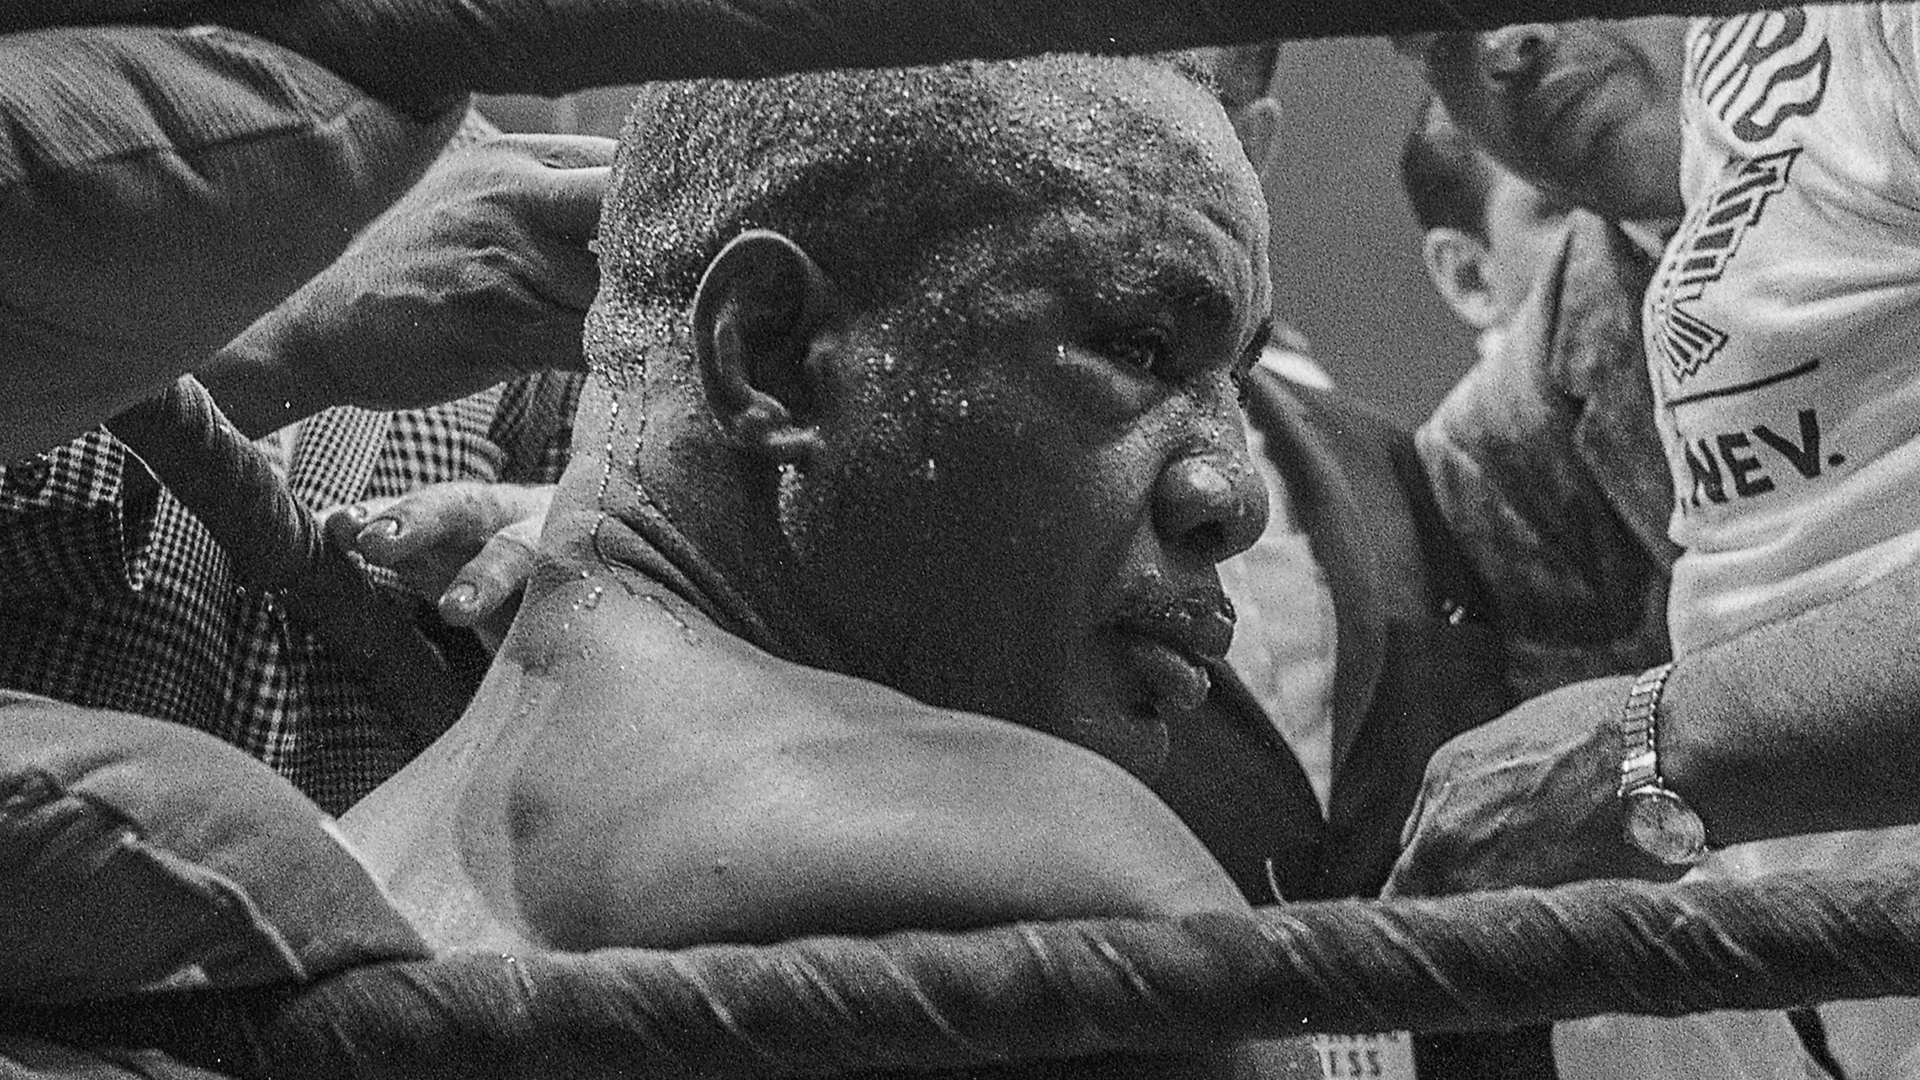 Sonny Liston Sweating Monochrome Looking At The Side Boxing 1965 Legend 1920x1080